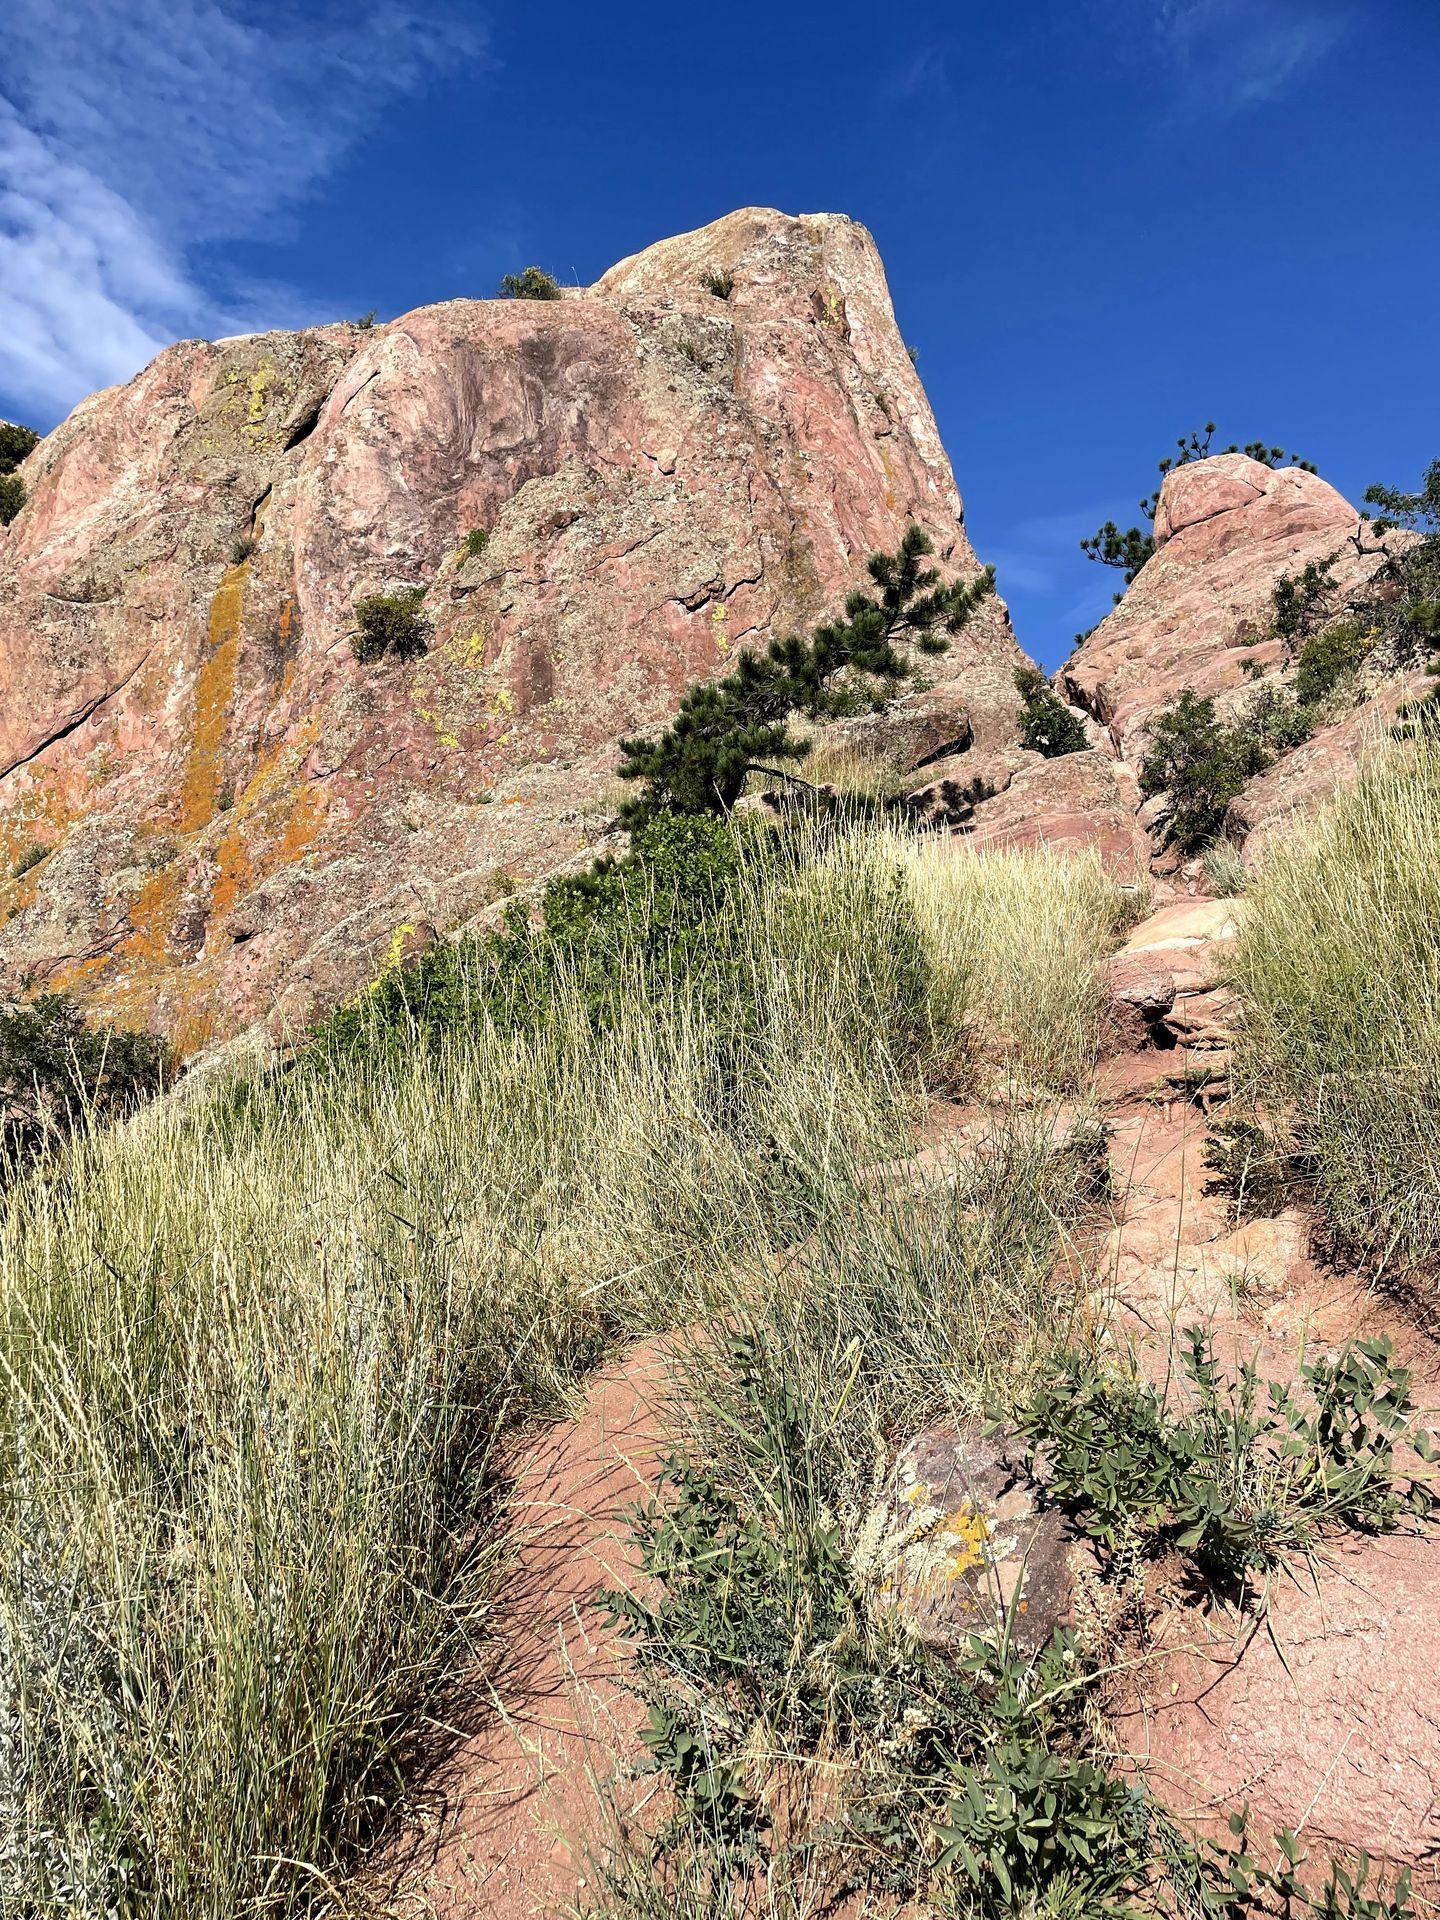 A path leading up to some large, red rocks.